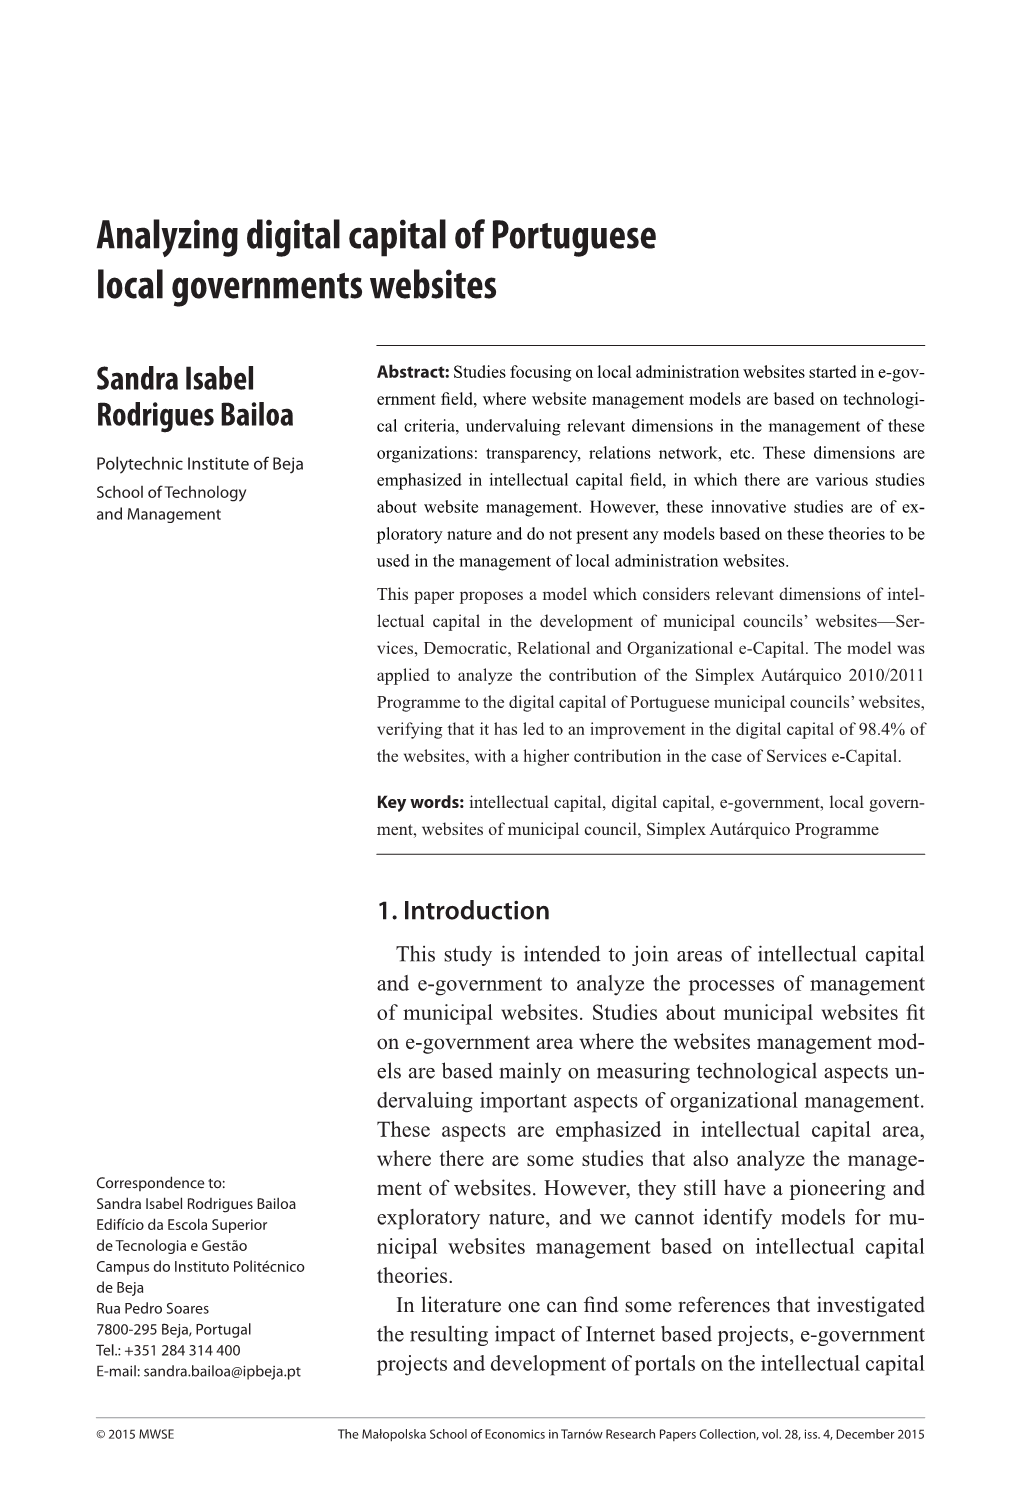 Analyzing Digital Capital of Portuguese Local Governments Websites